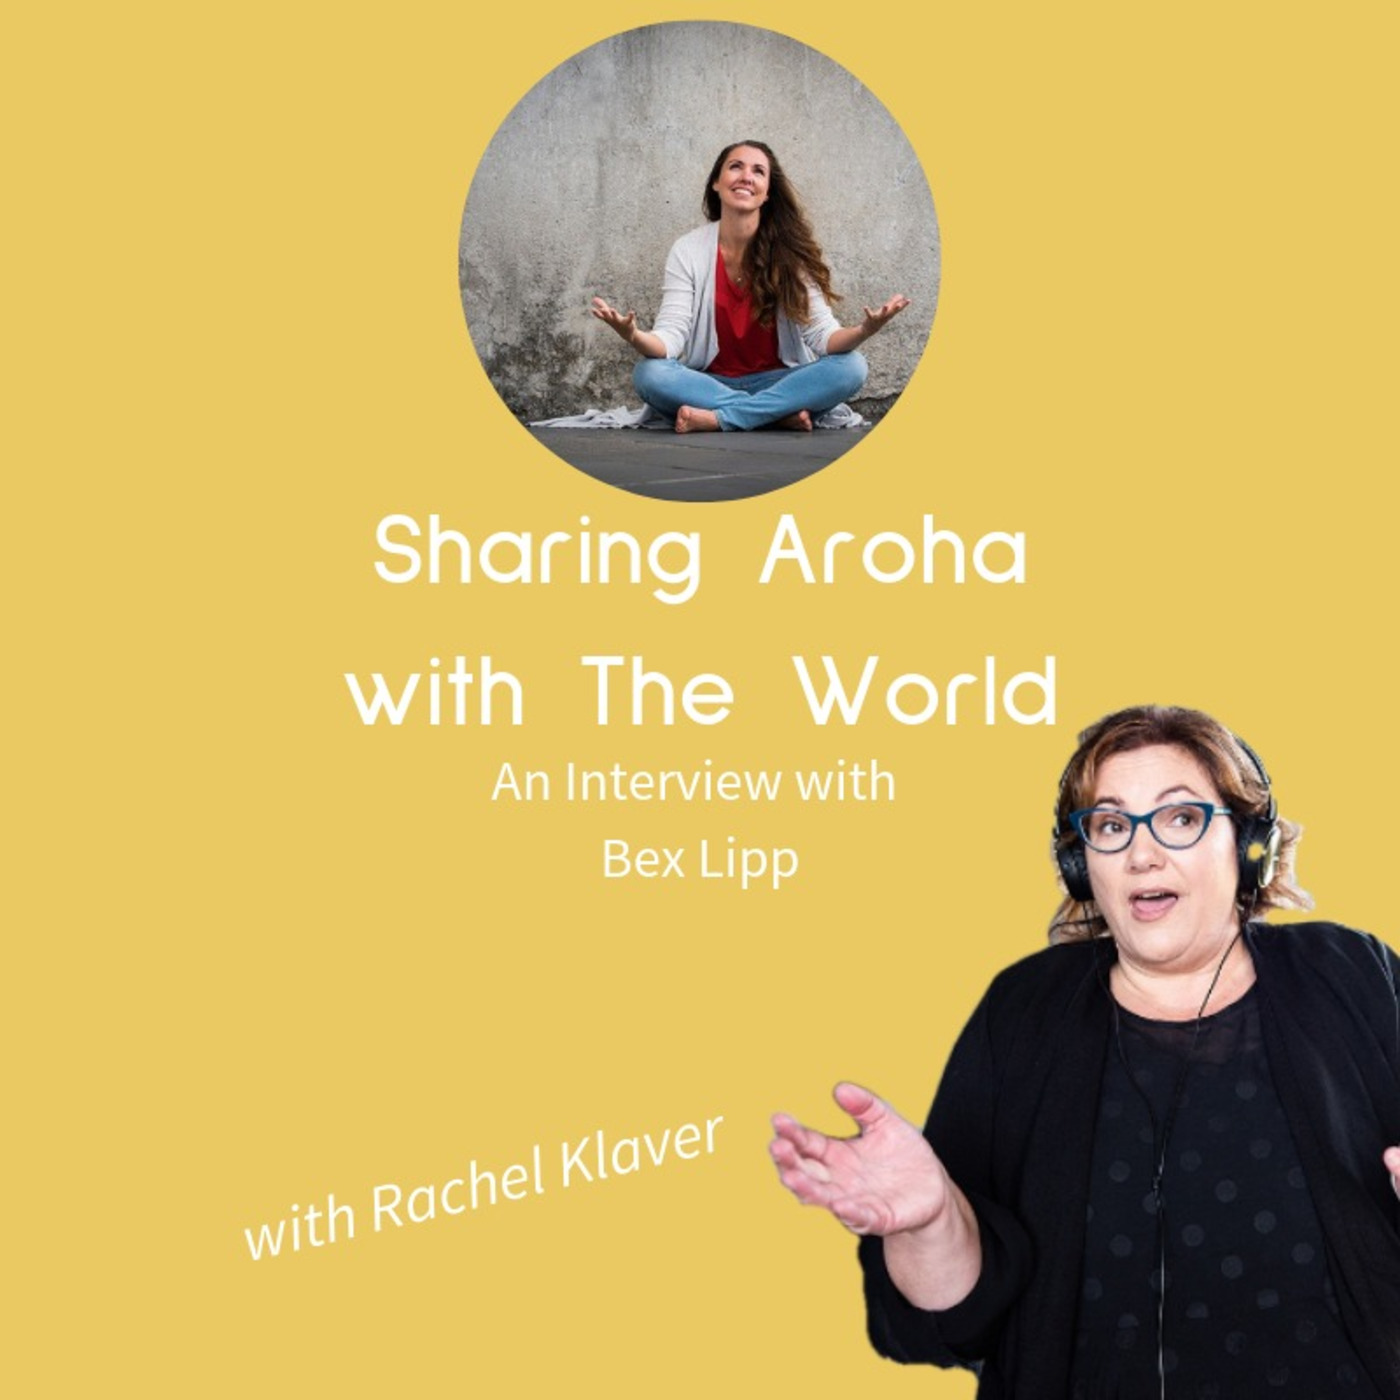 Sharing Aroha with the World - an Interview with Bex Lipp